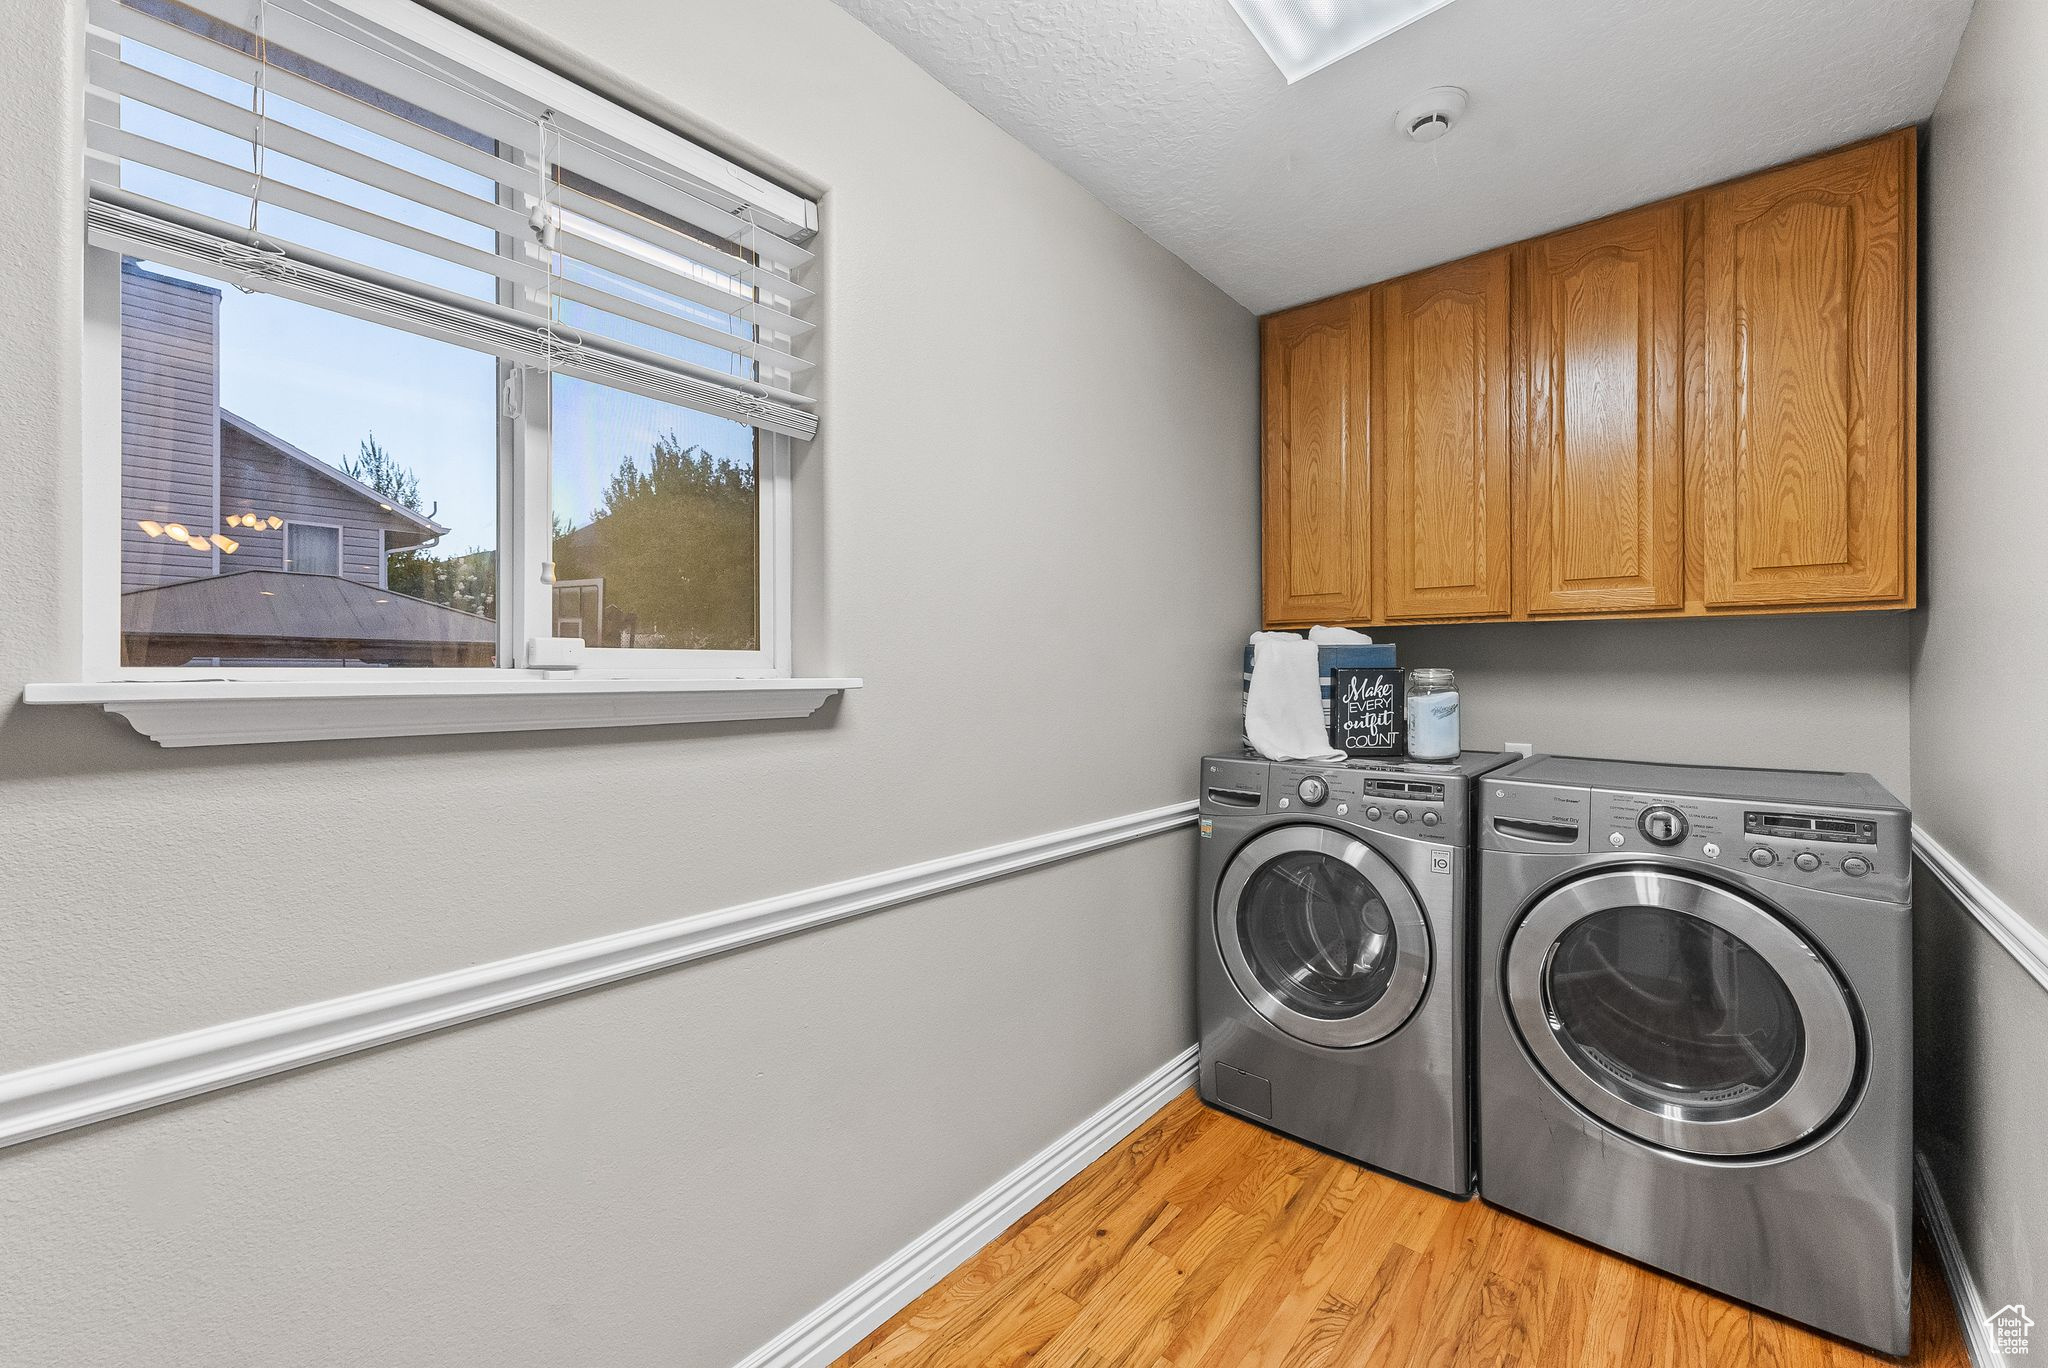 Laundry area featuring cabinets, independent washer and dryer, and light wood-type flooring